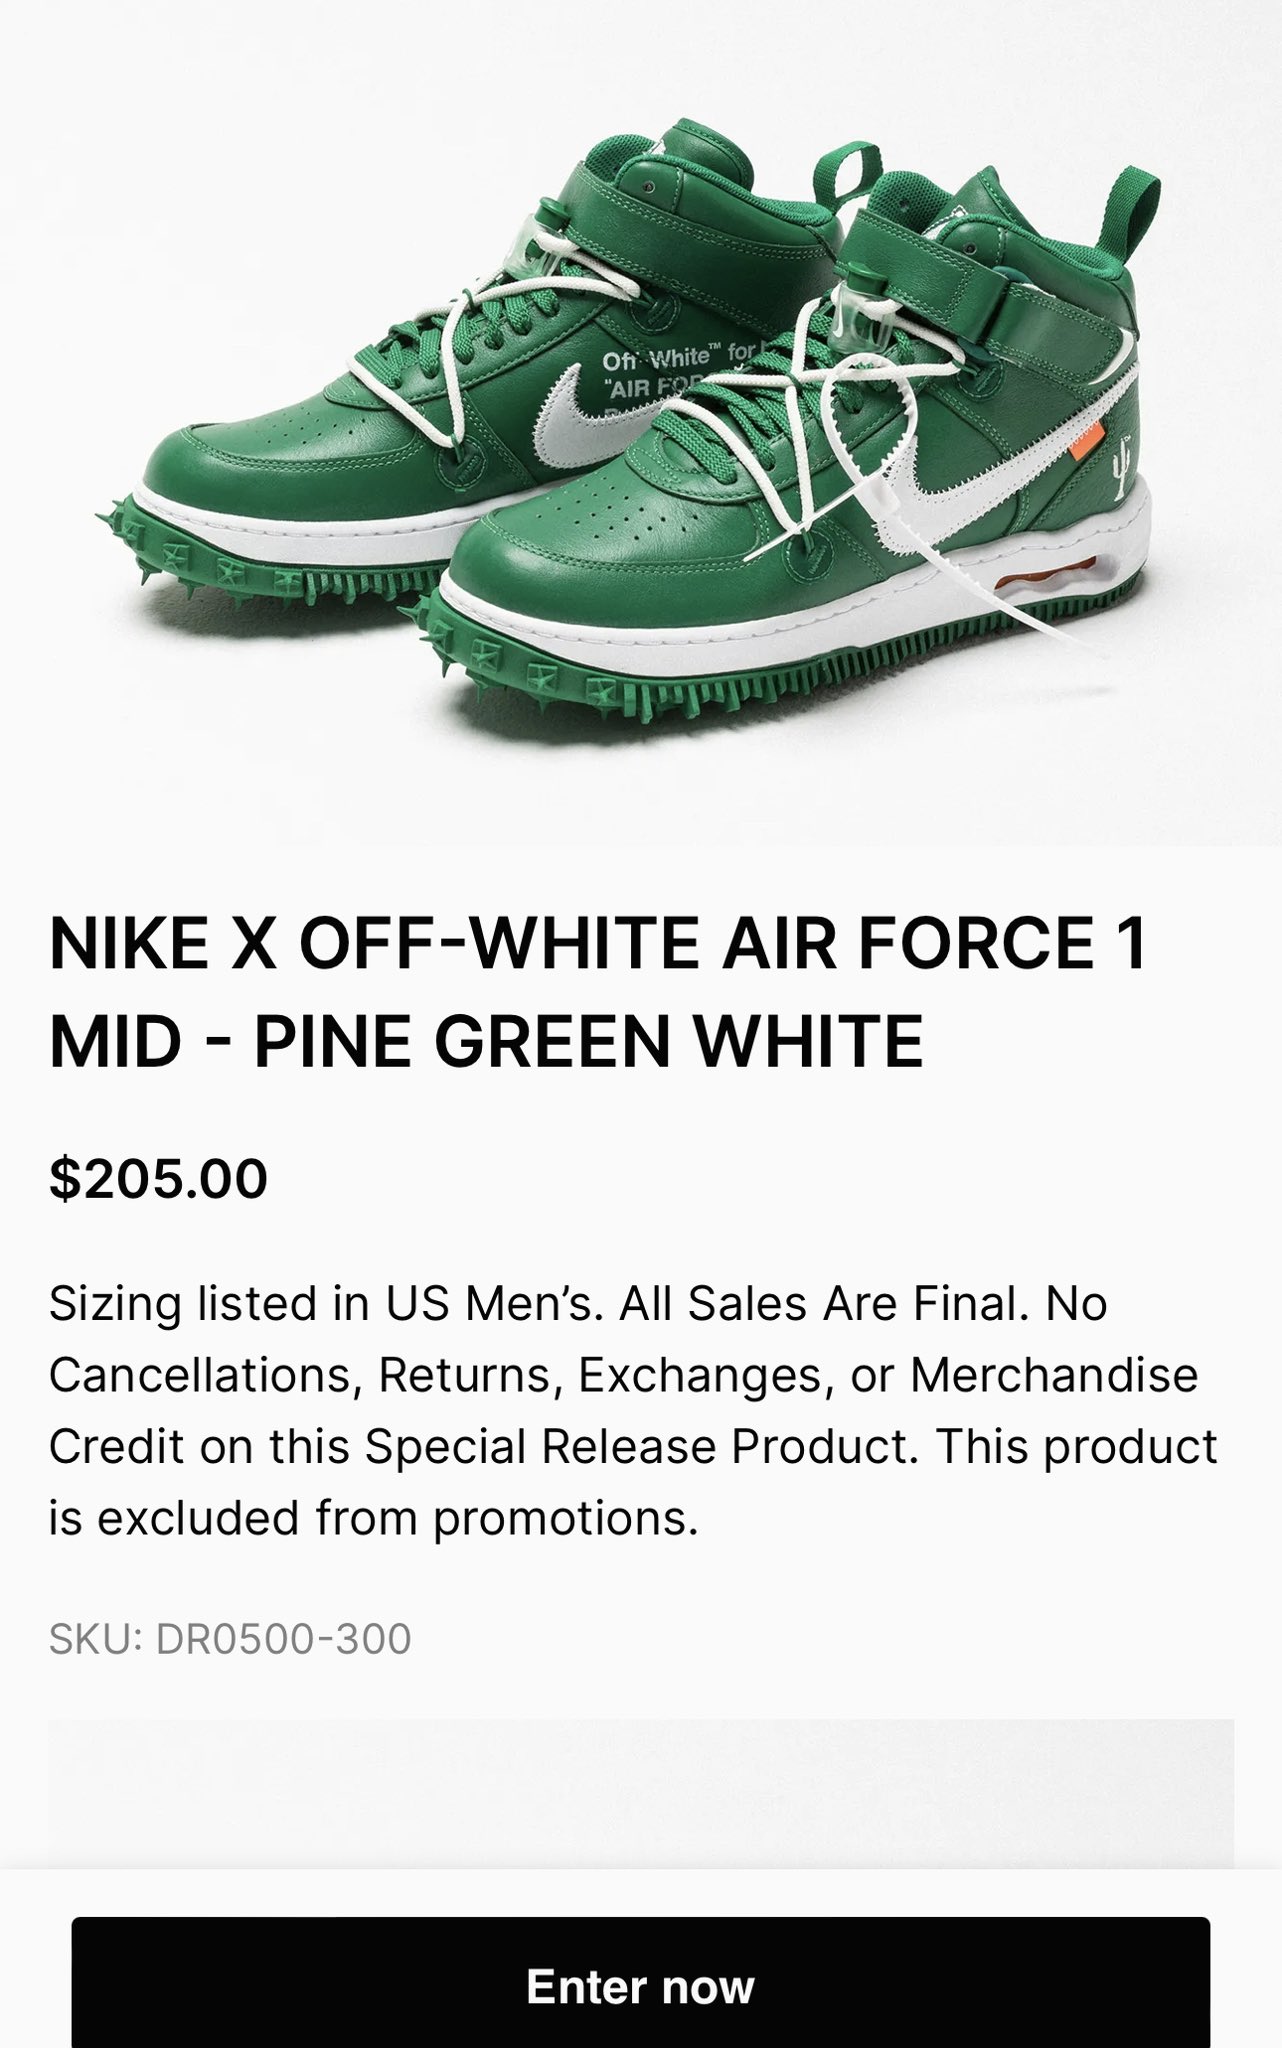 SNKRS STOCK on Twitter: "Nike x off-white Air Force one mid “pine green  white” RAFFLE https://t.co/rYpEHoiqRp https://t.co/zWeN9QhE80" / Twitter